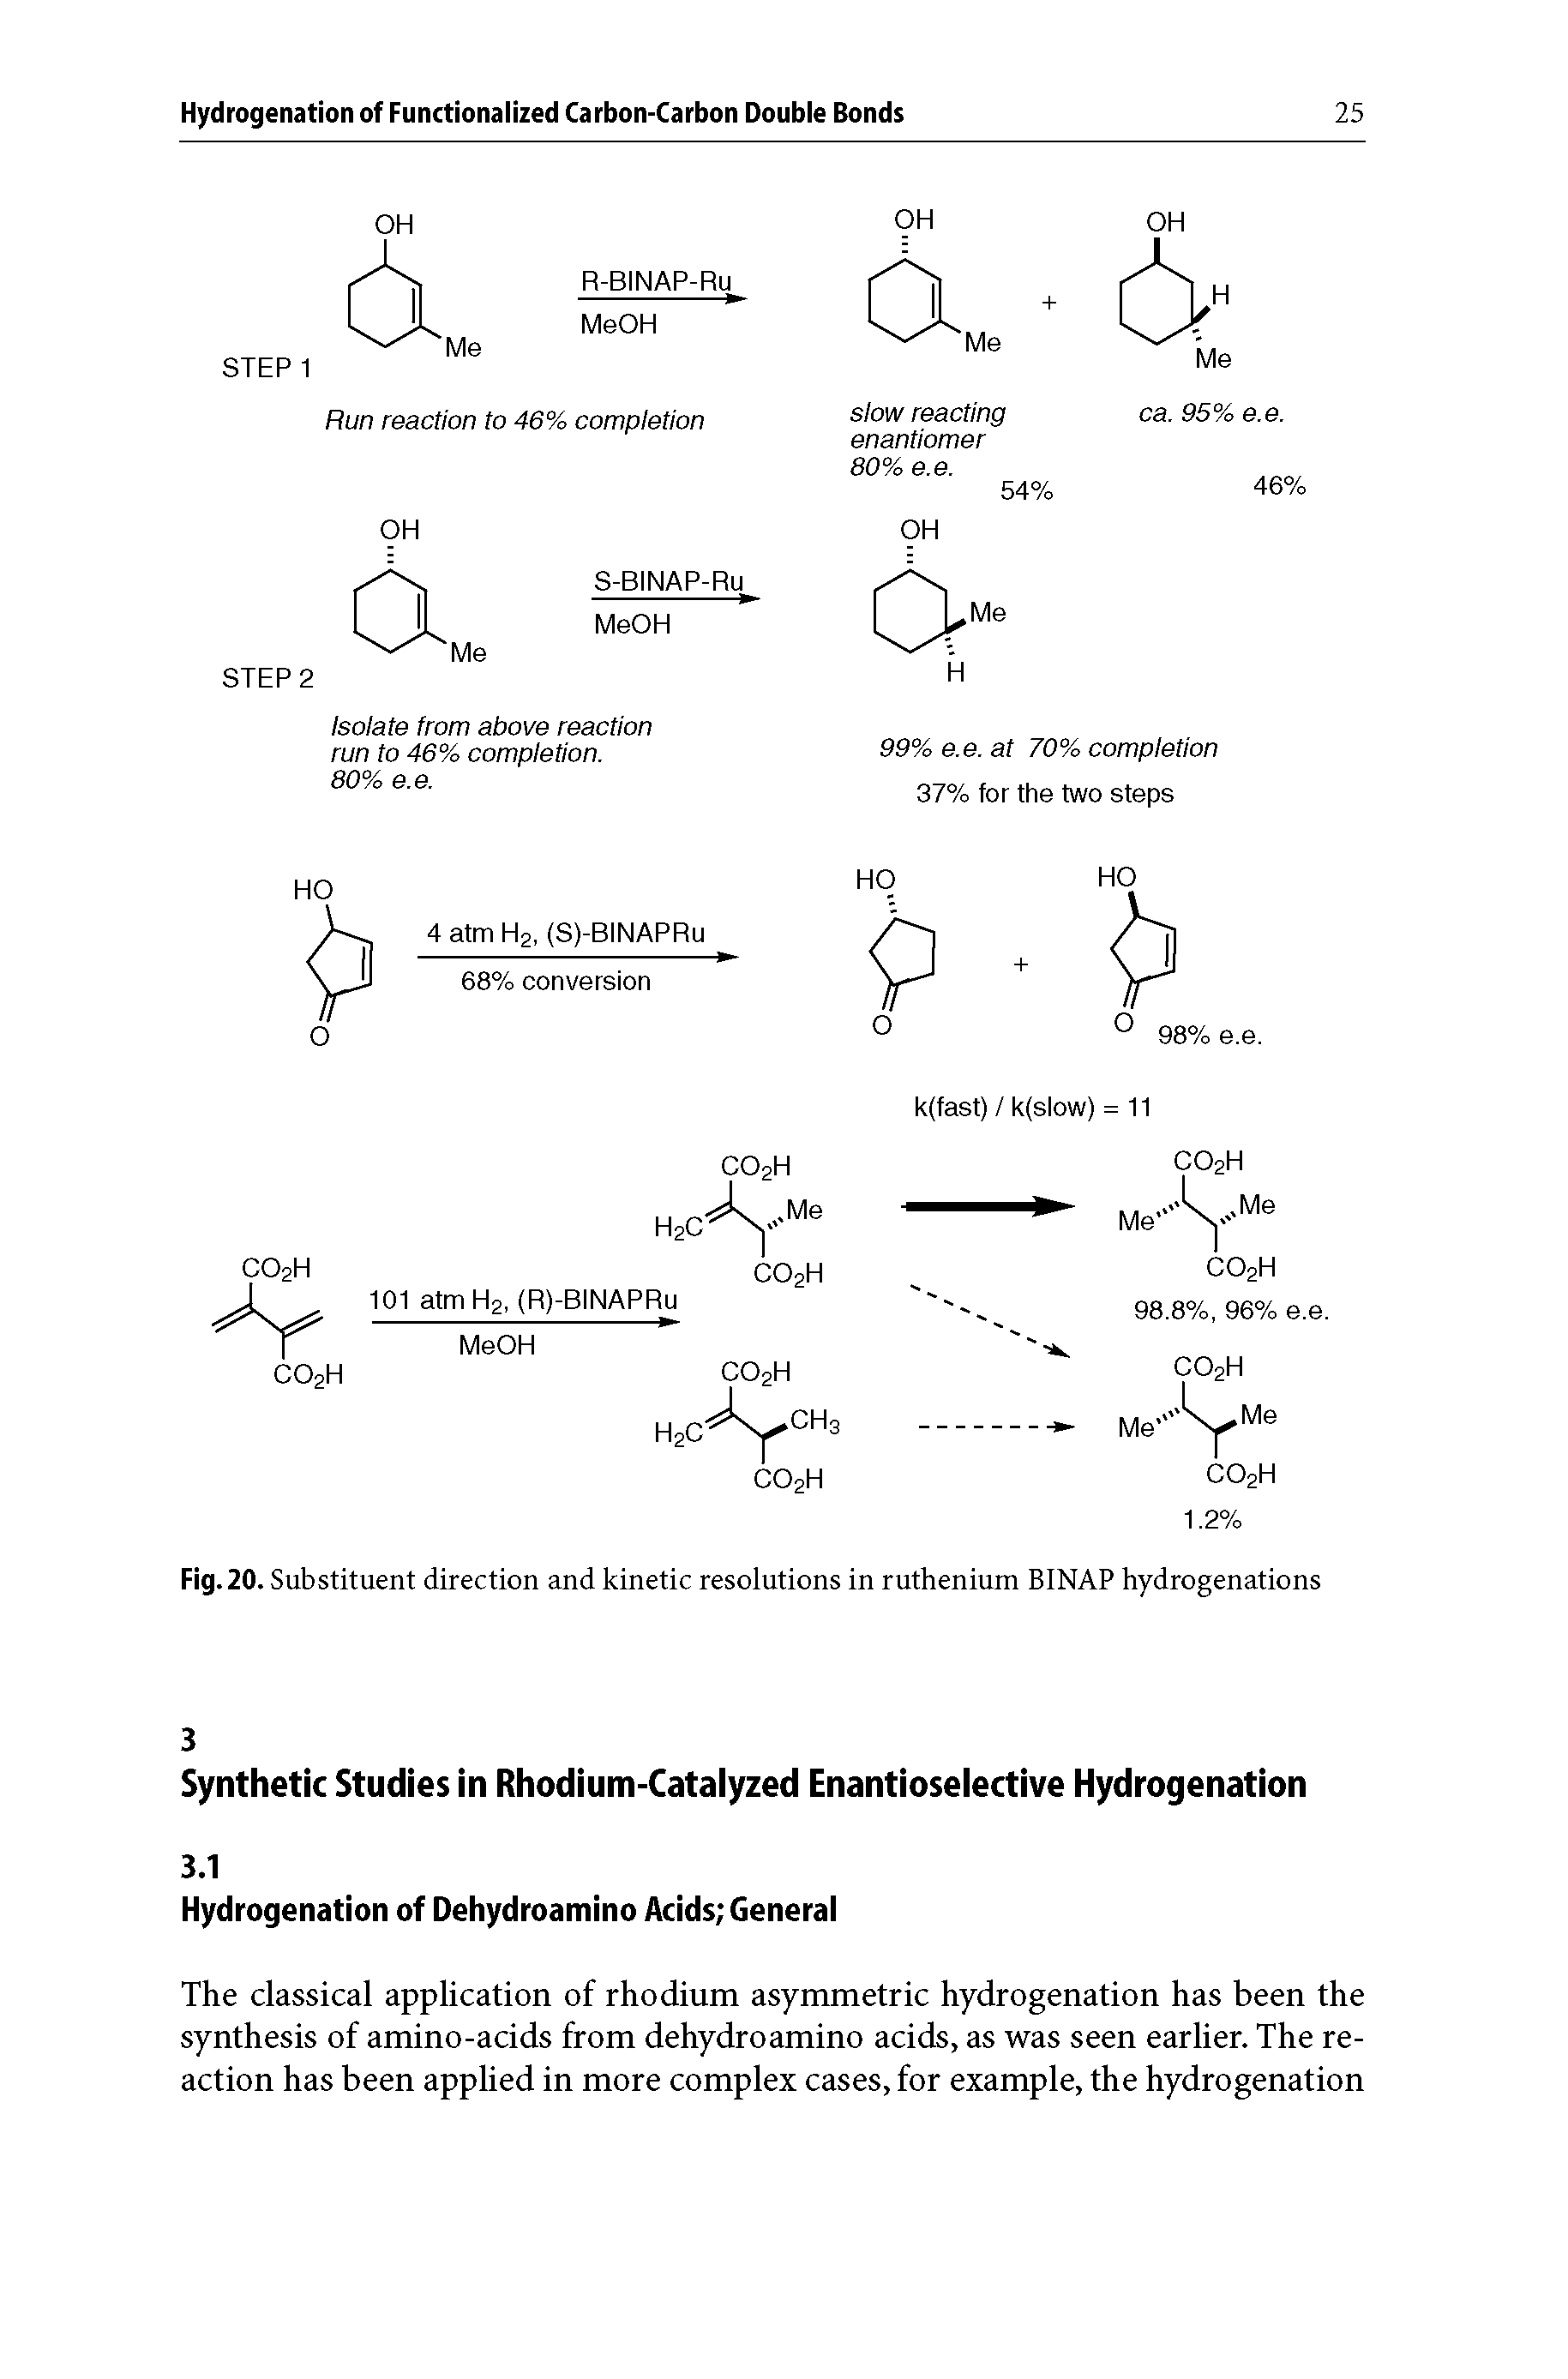 Fig. 20. Substituent direction and kinetic resolutions in ruthenium BINAP hydrogenations...